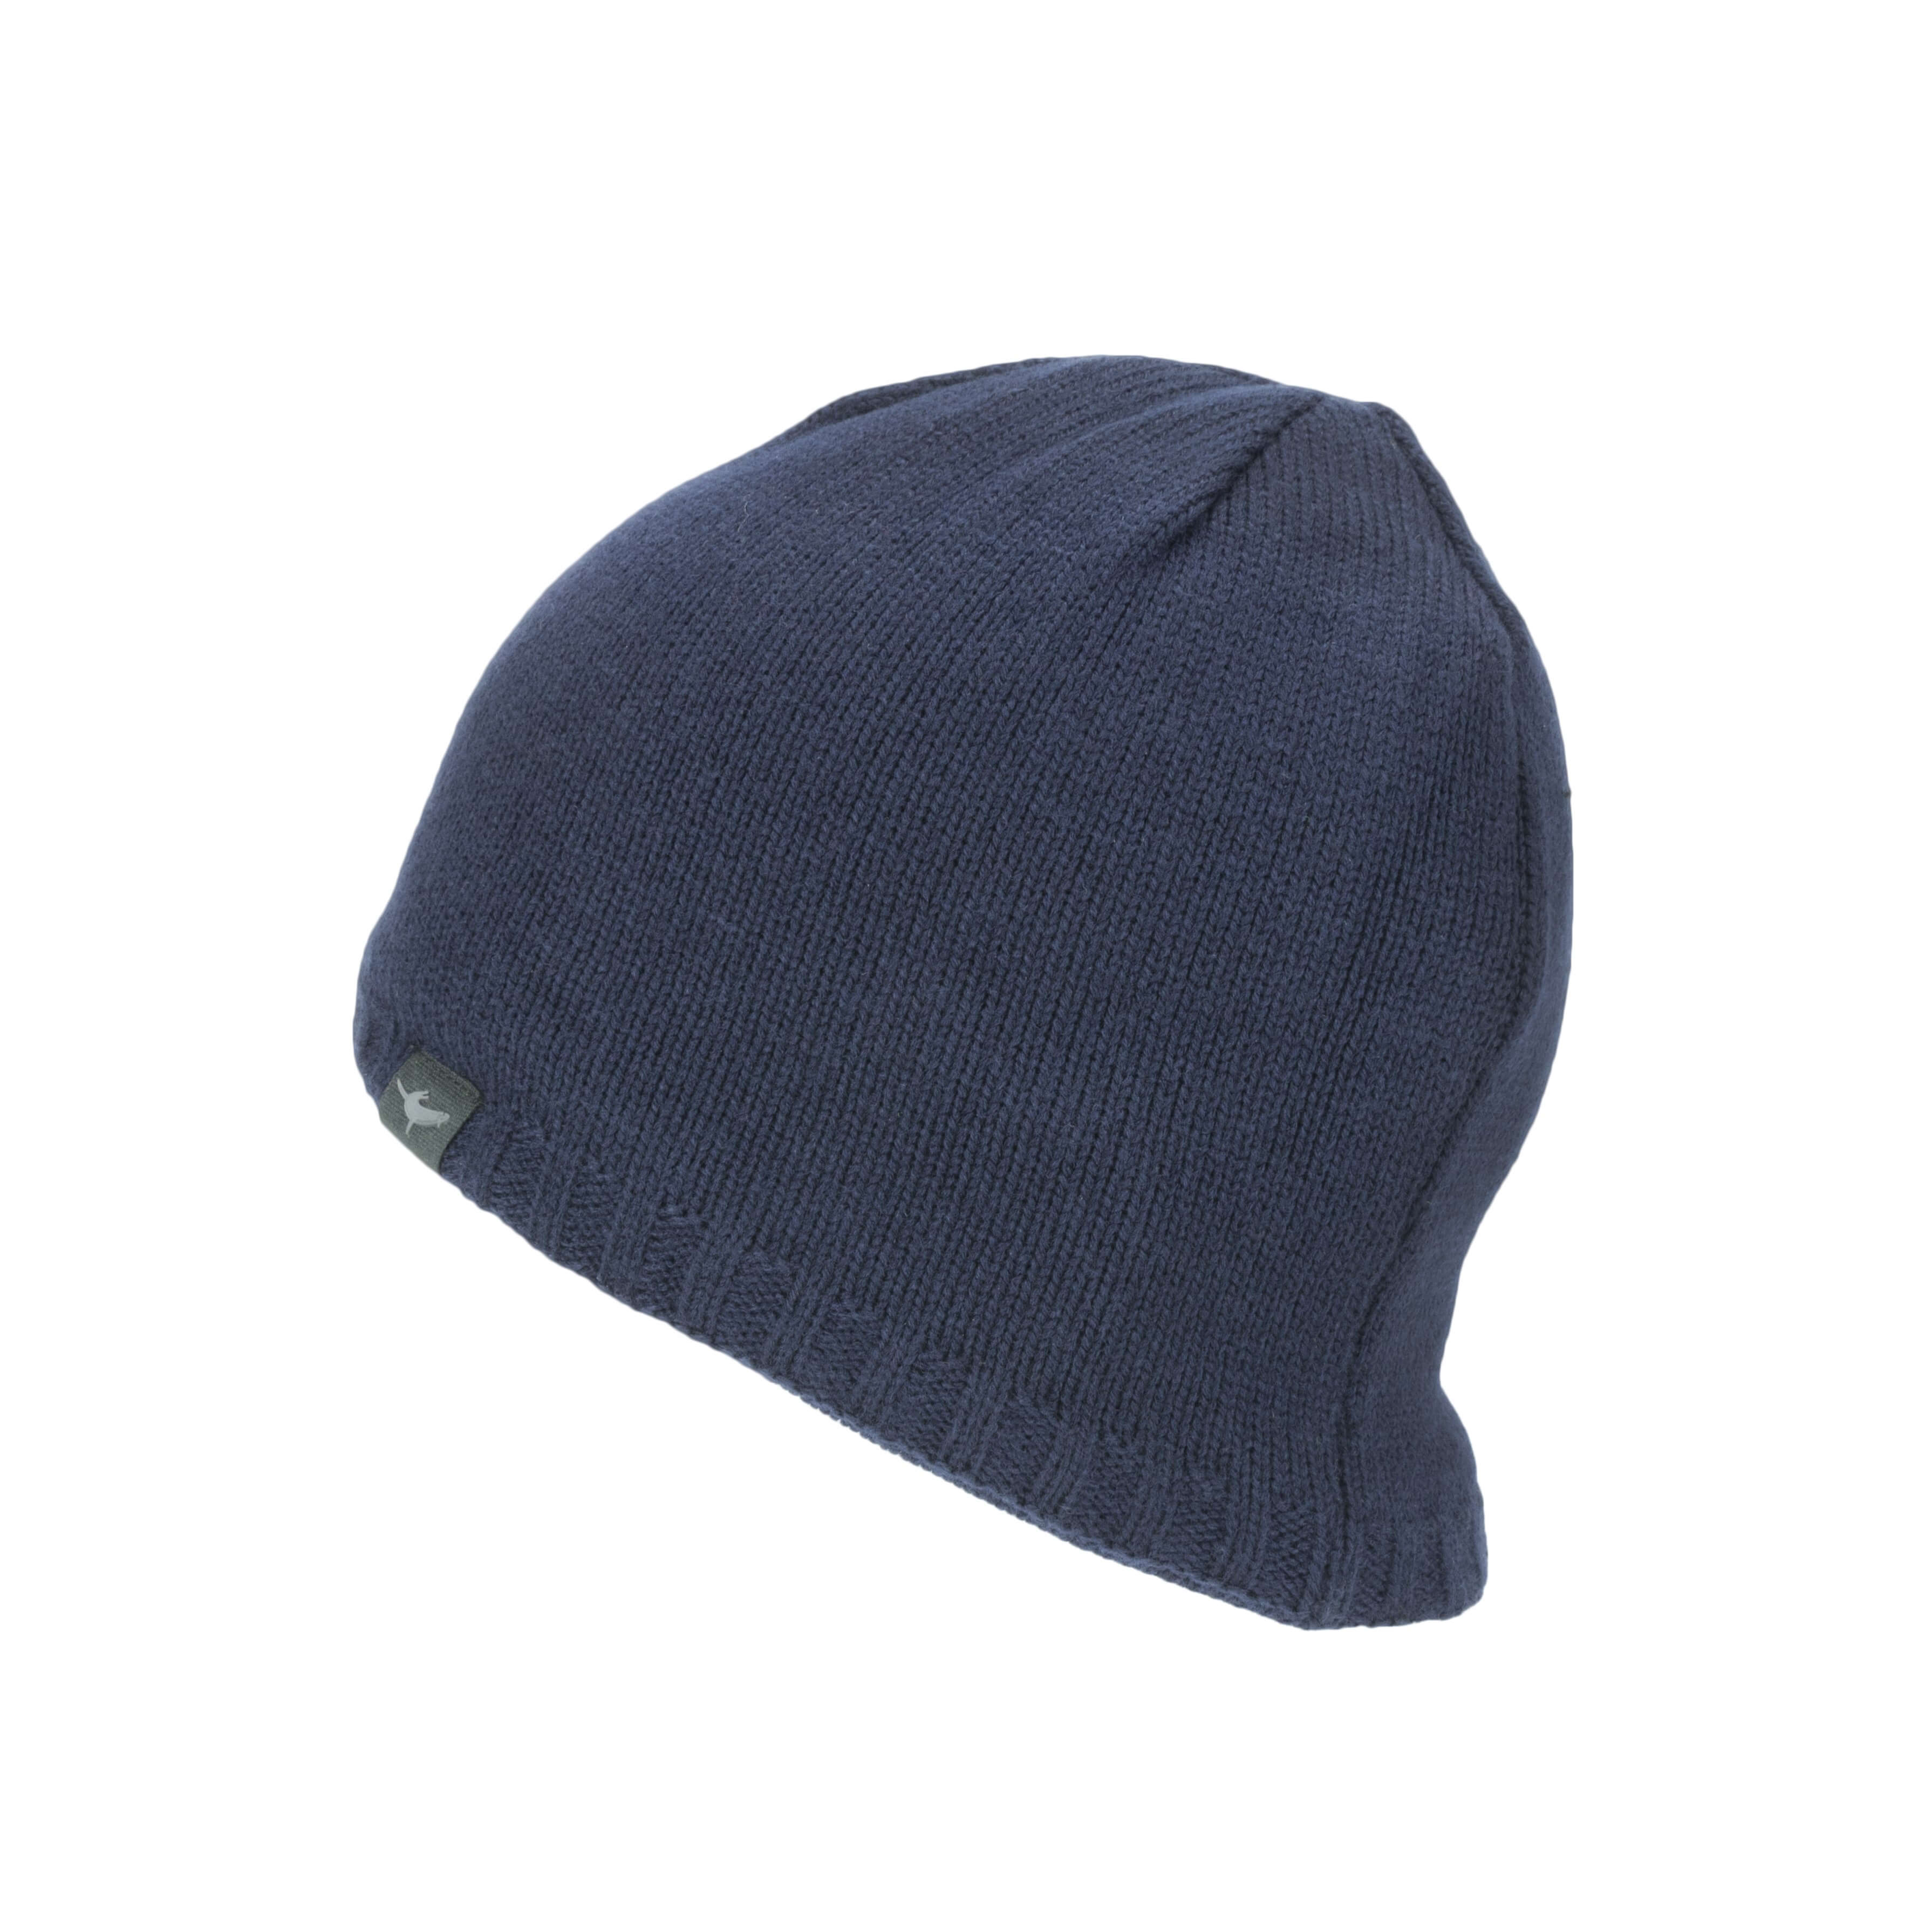 Waterproof Cold Weather Beanie Hat - Size: S / M - Color: Navy Blue